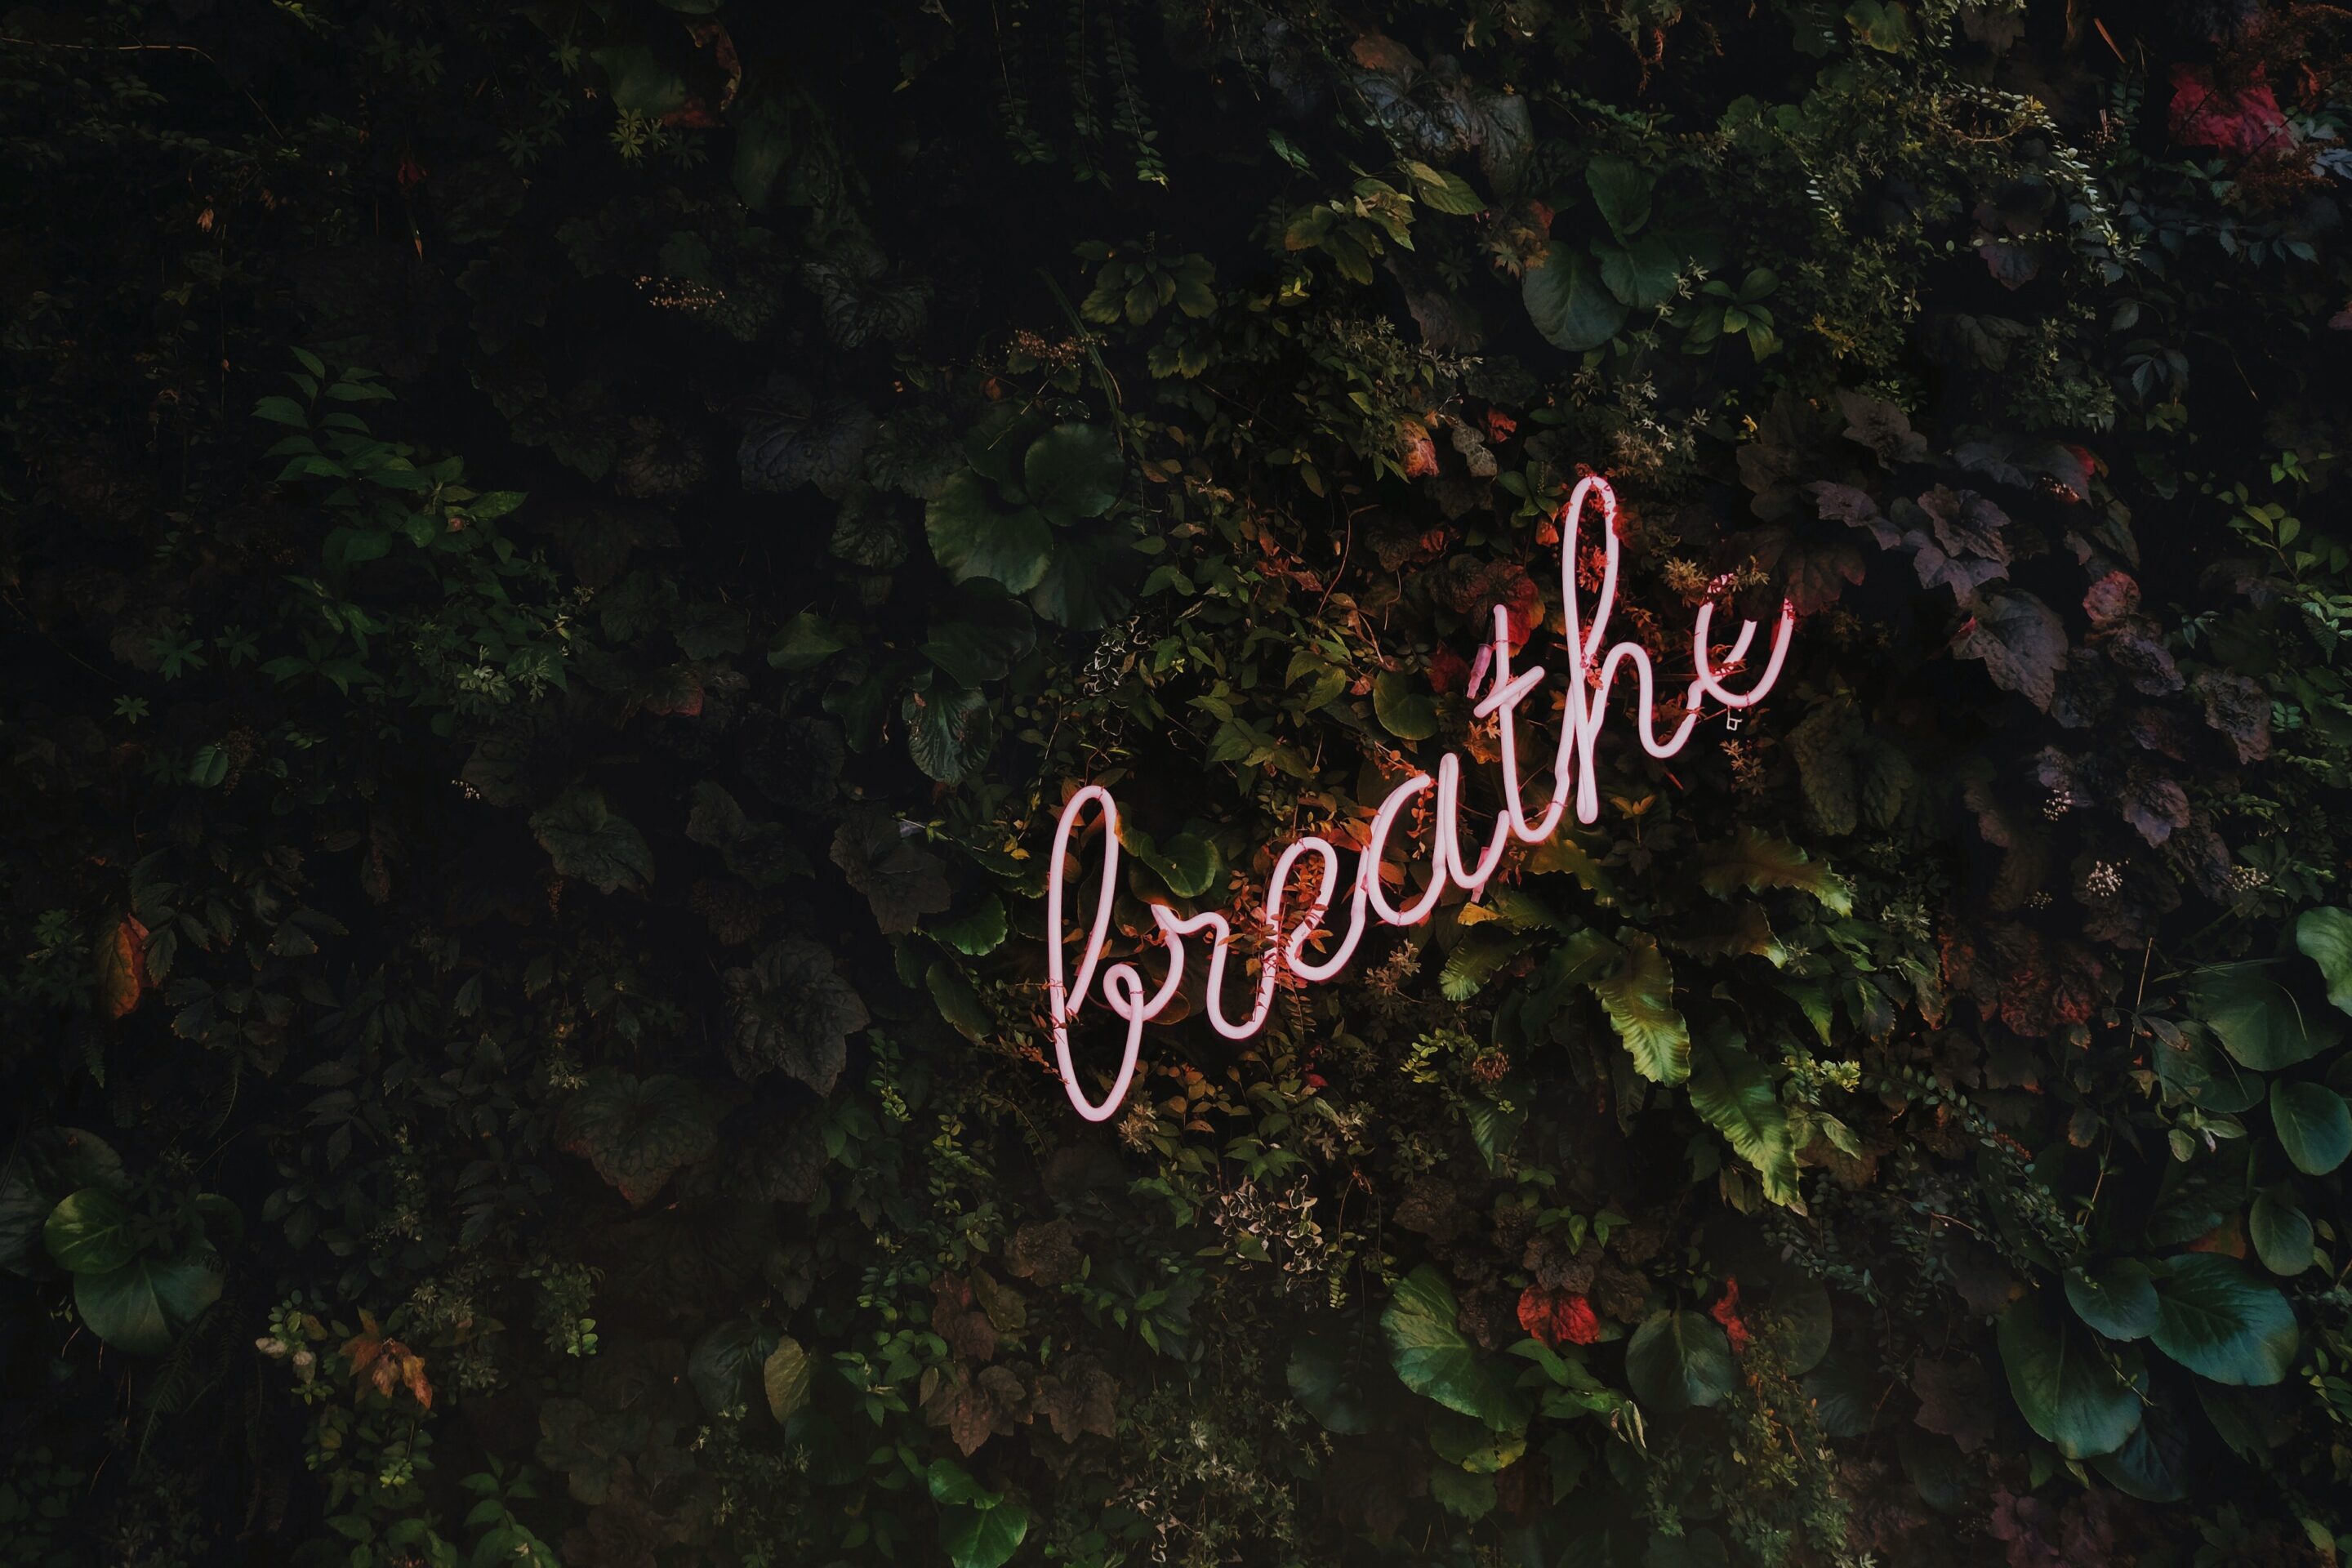 Breathe. It's a critical part of stress relief!